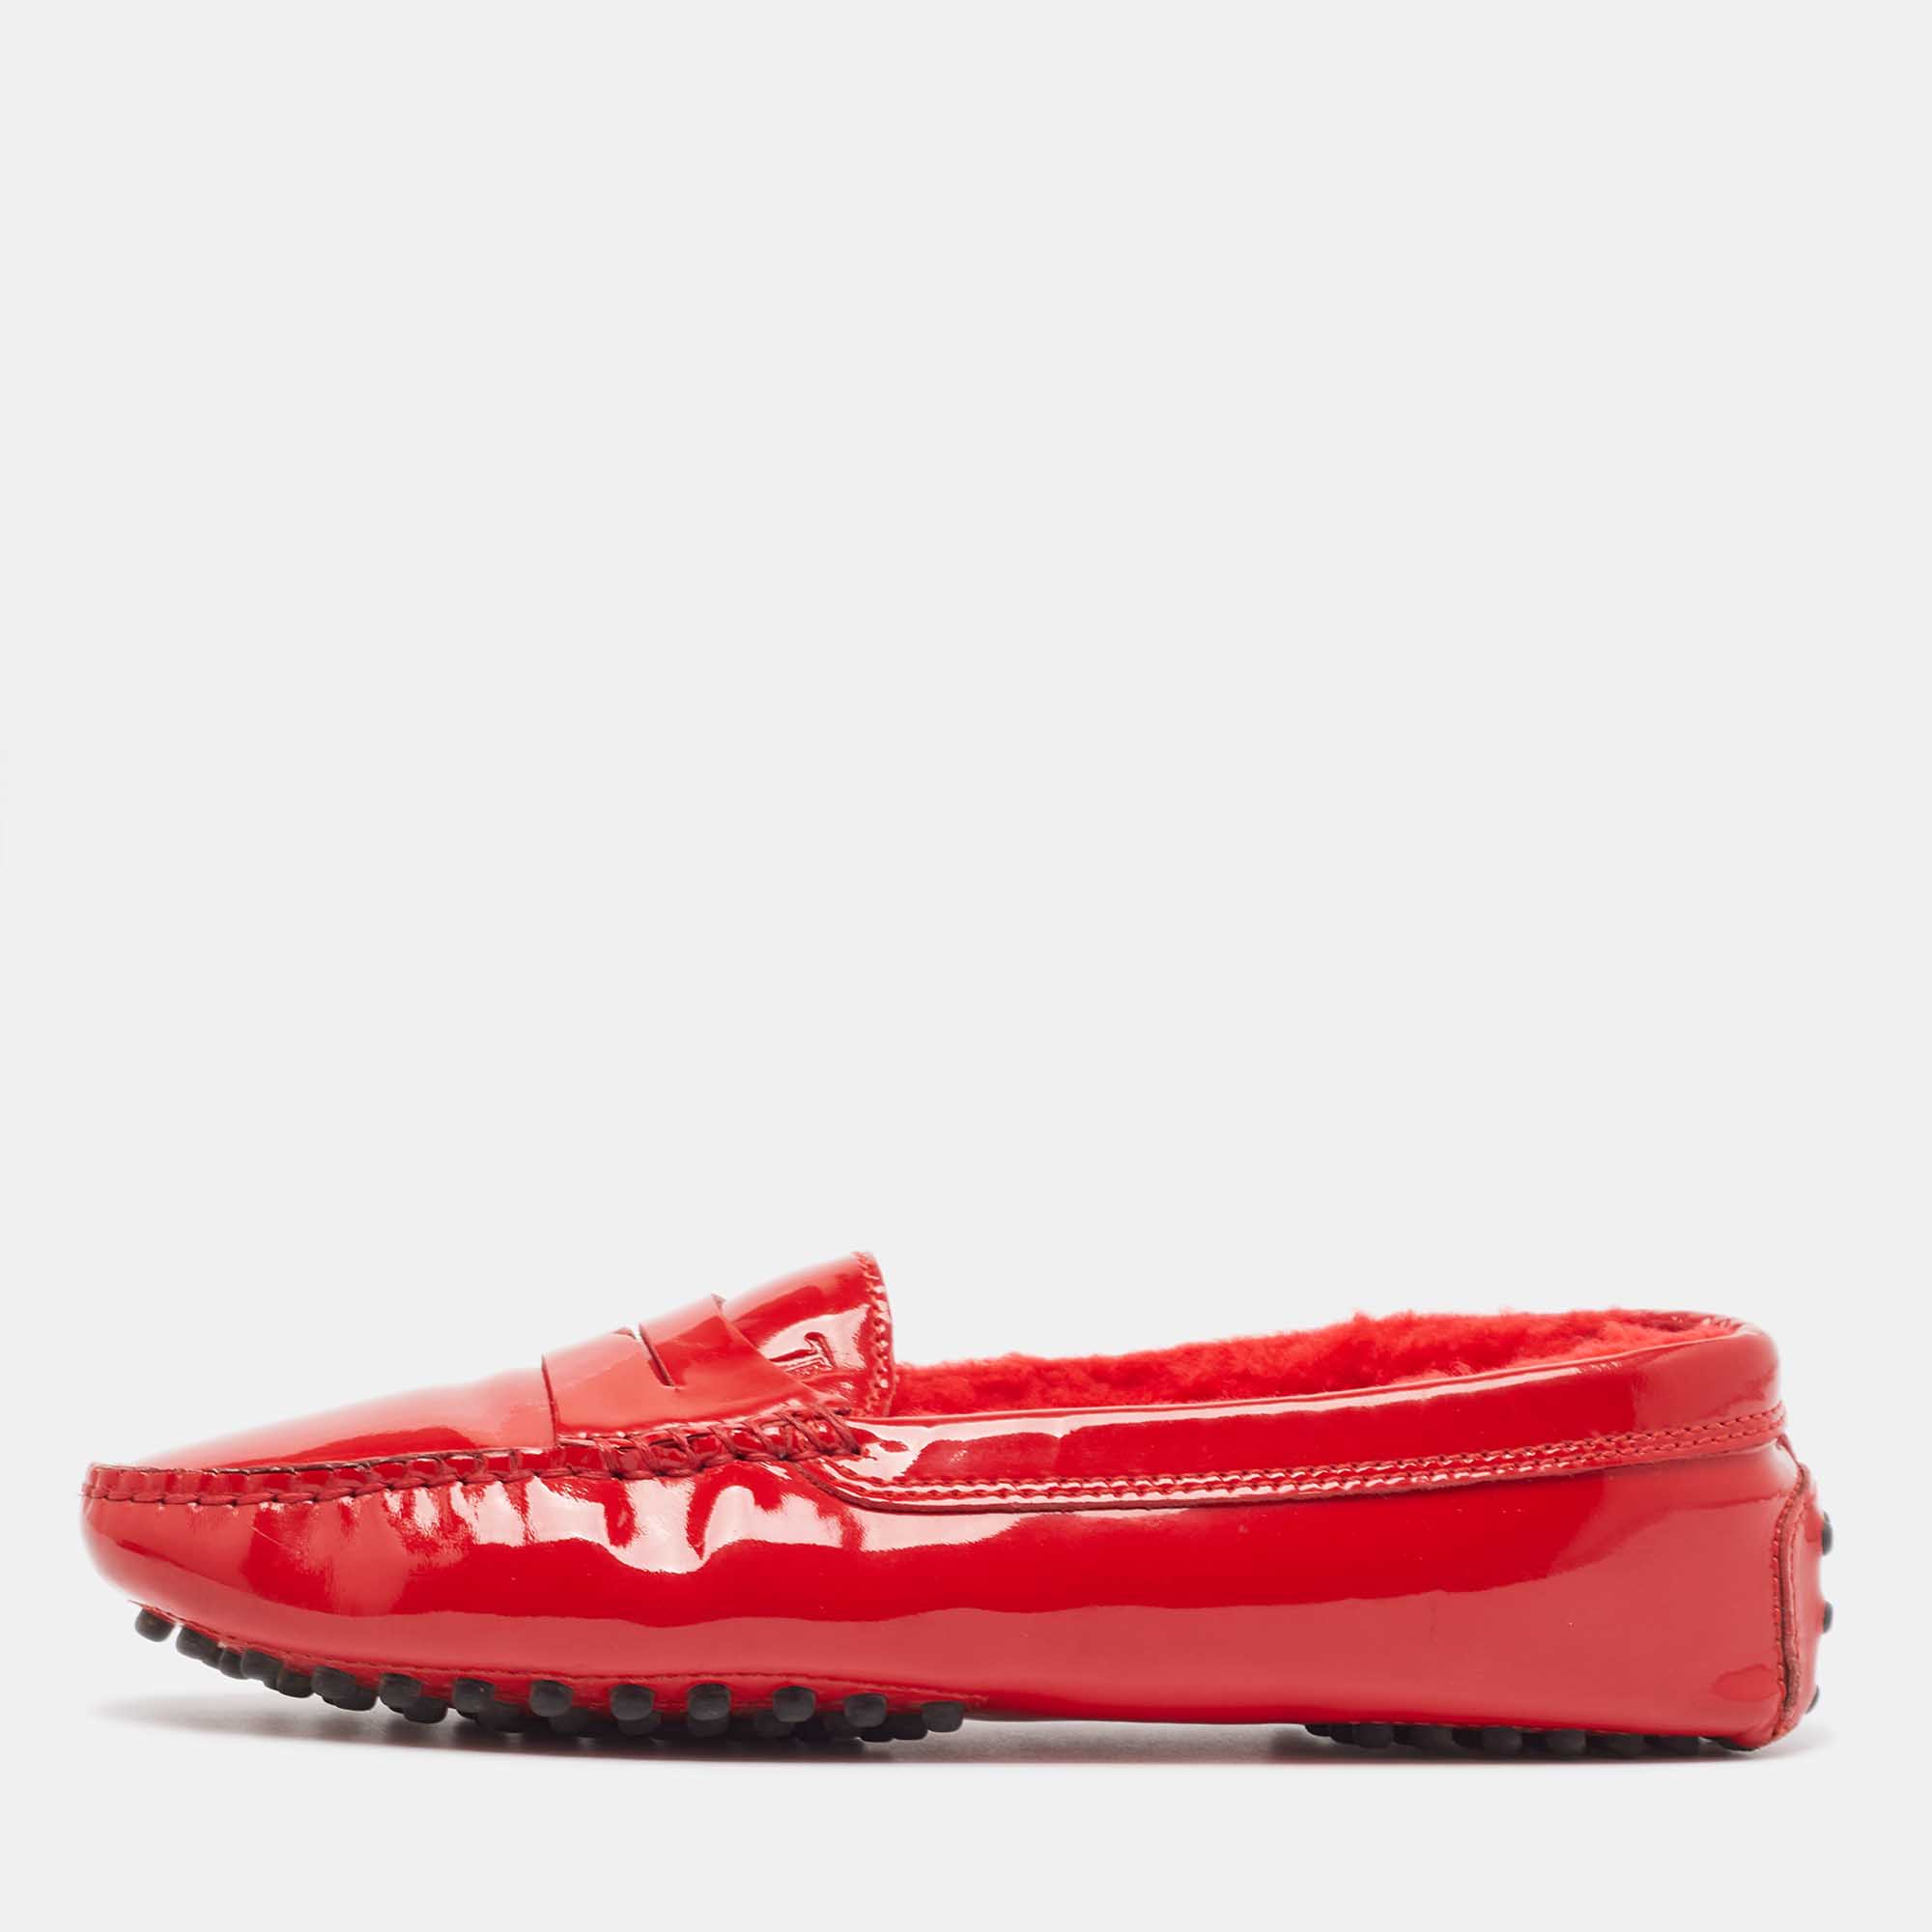 Tod's Red Patent Leather Penny Loafers Size 37